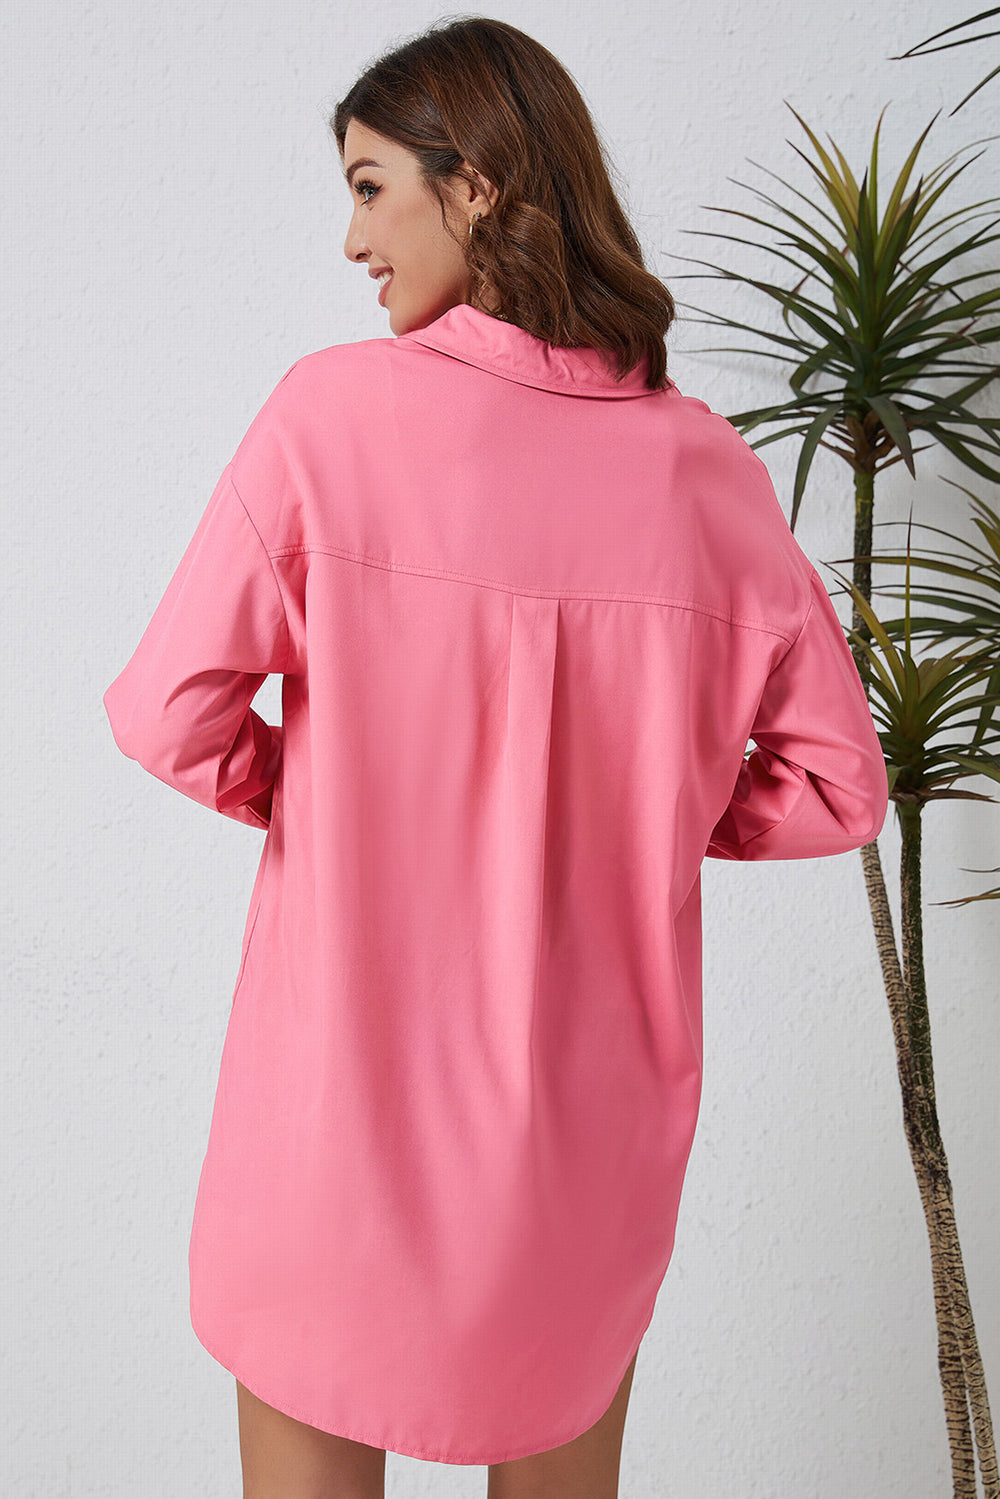 Dropped Shoulder Longline Shirt - Cheeky Chic Boutique